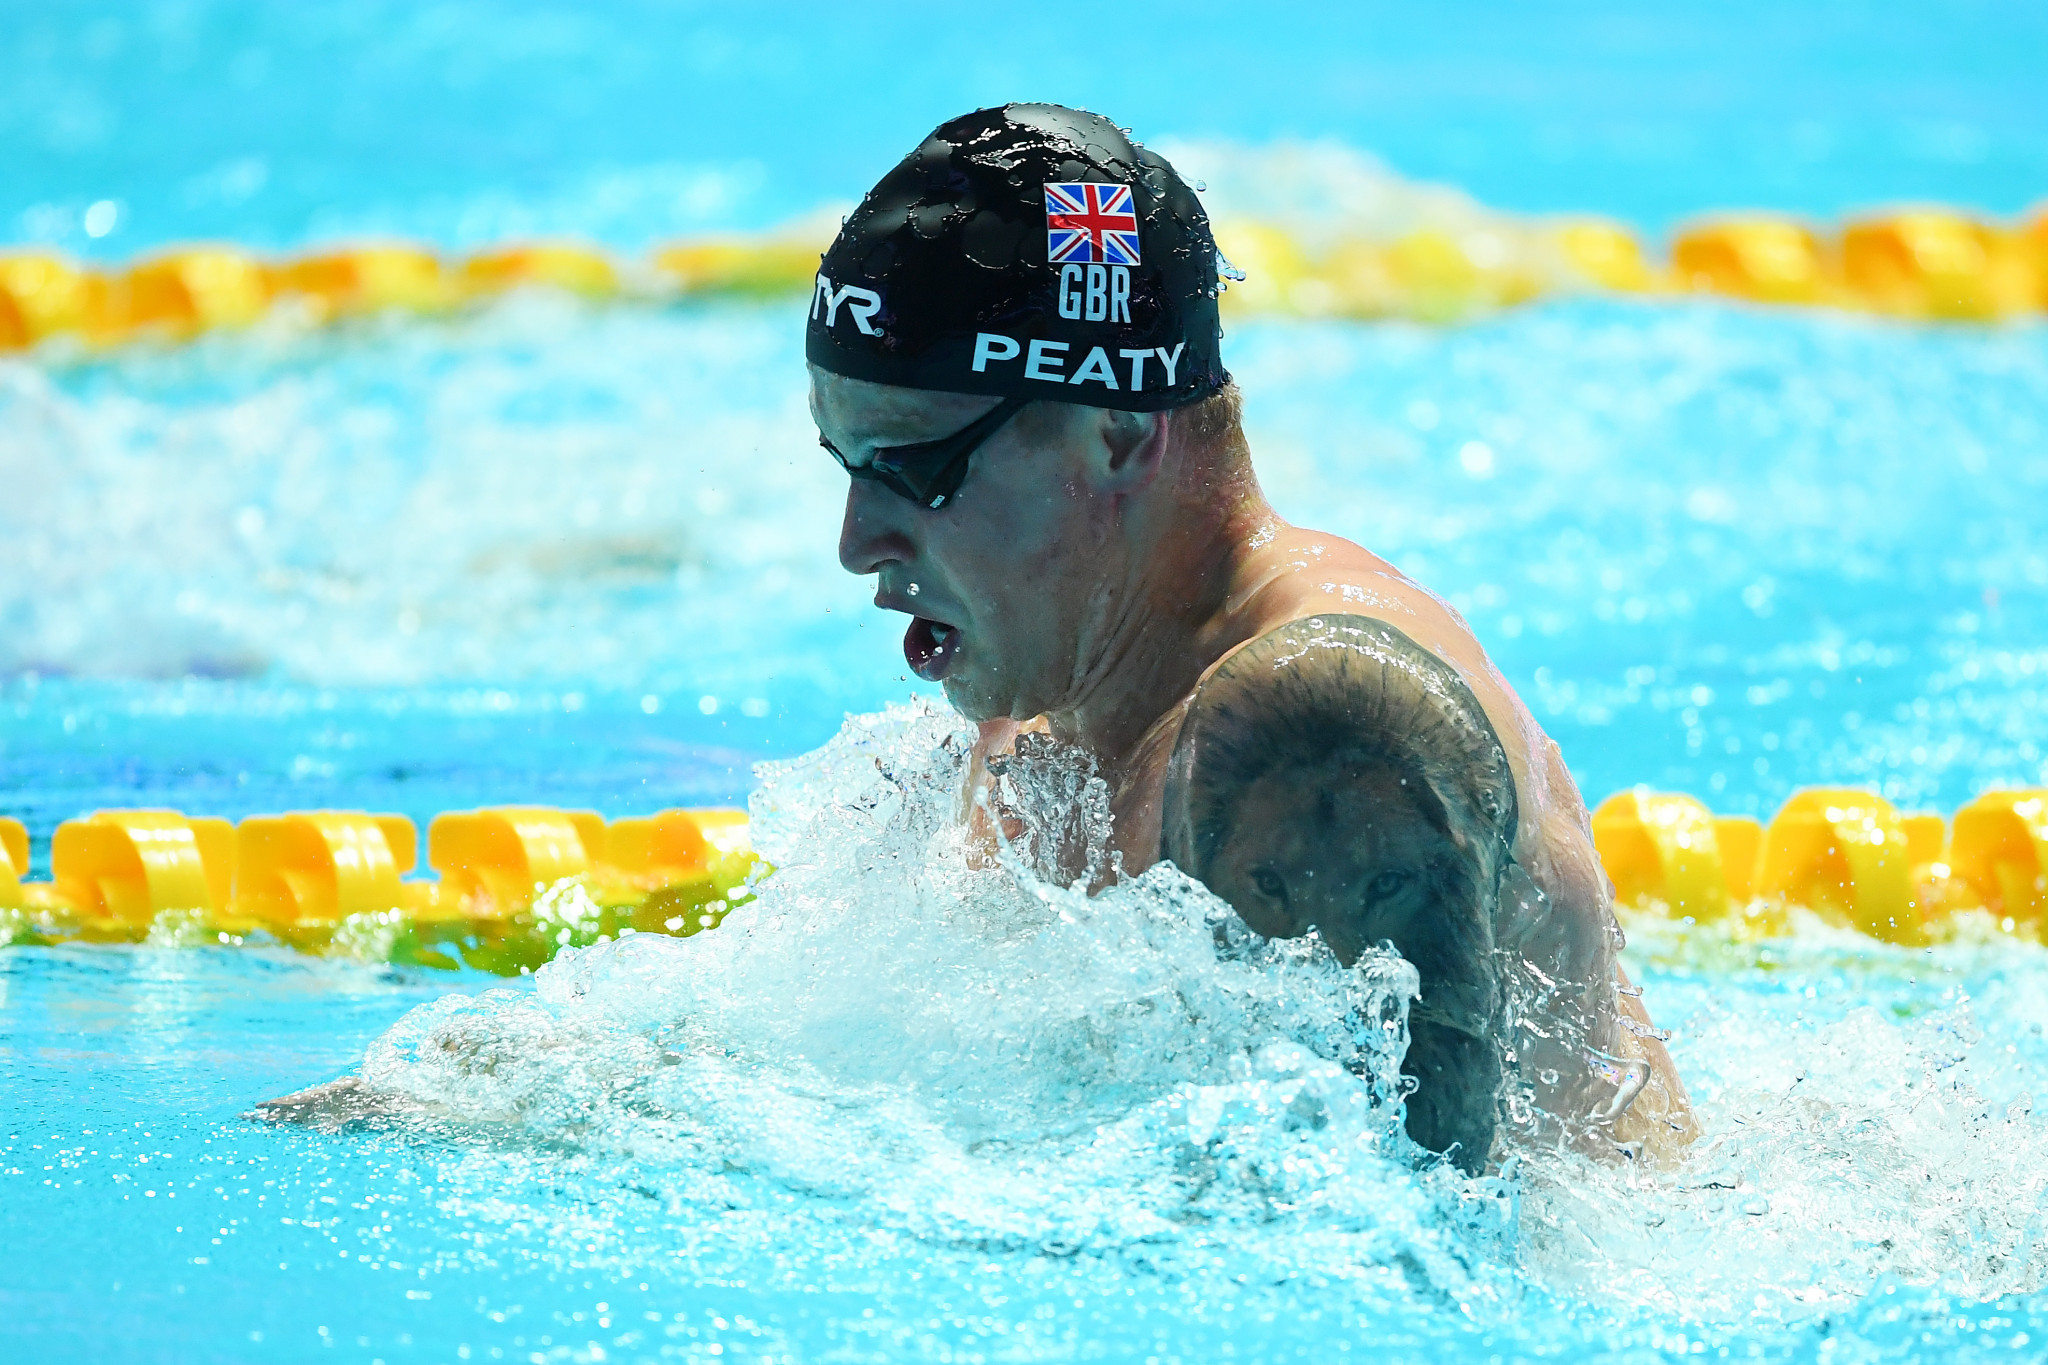 Olympic champion Peaty among quartet of British swimmers selected for Tokyo 2020